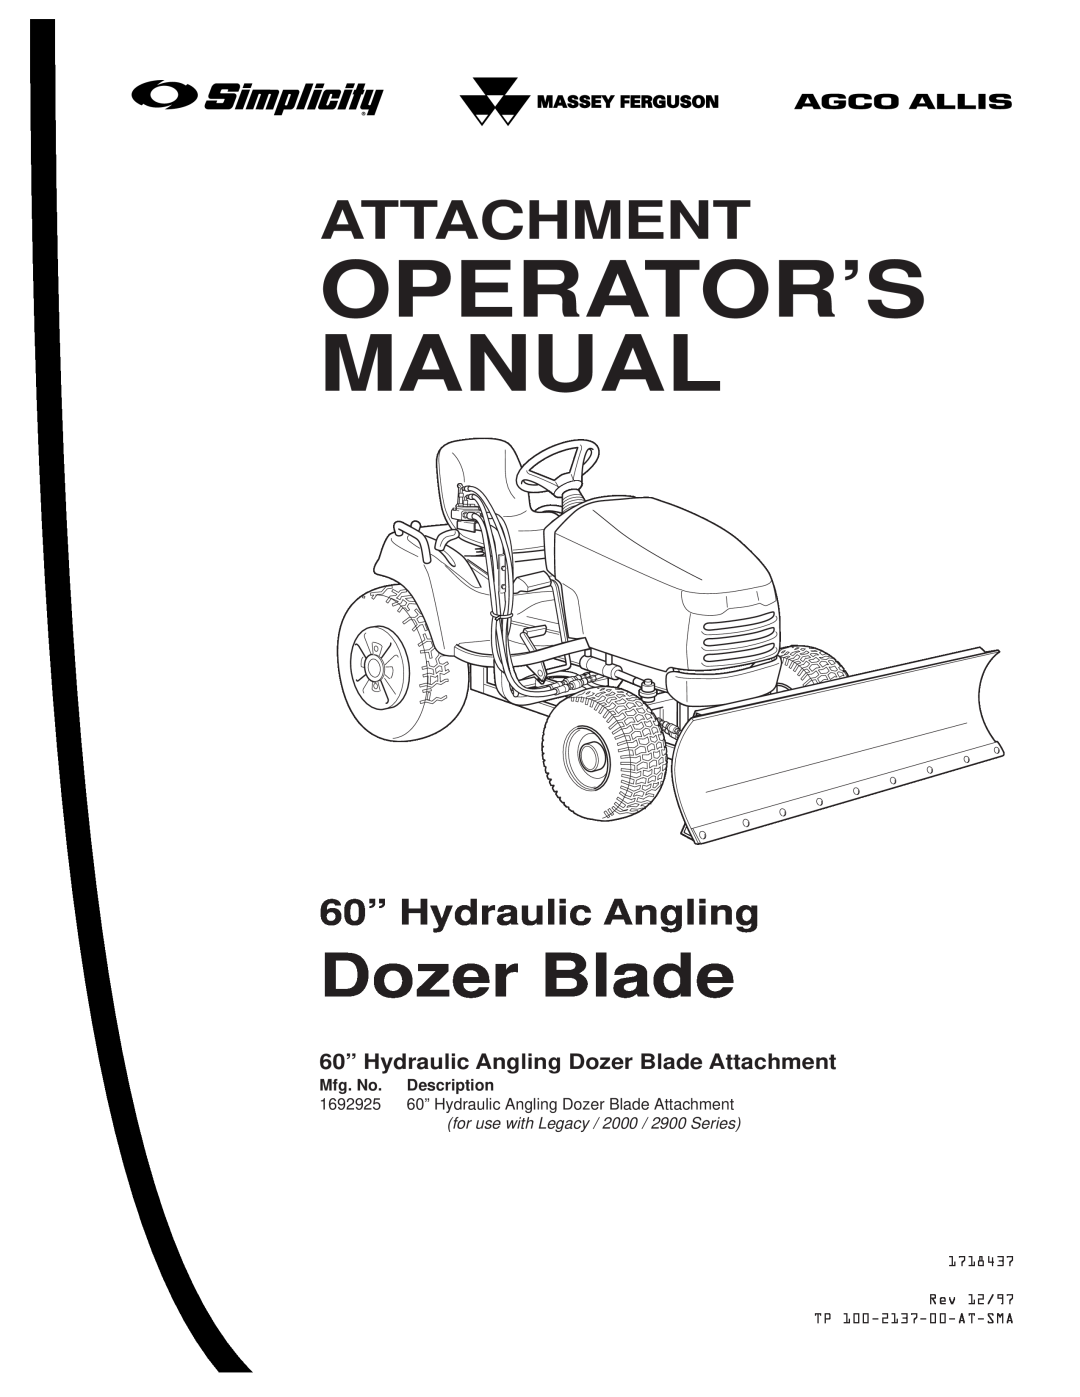 Snapper manual Operator’S Manual, Dozer Blade, Attachment, 60” Hydraulic Angling, Rev 12/97 TP 100-2137-00-AT-SMA 